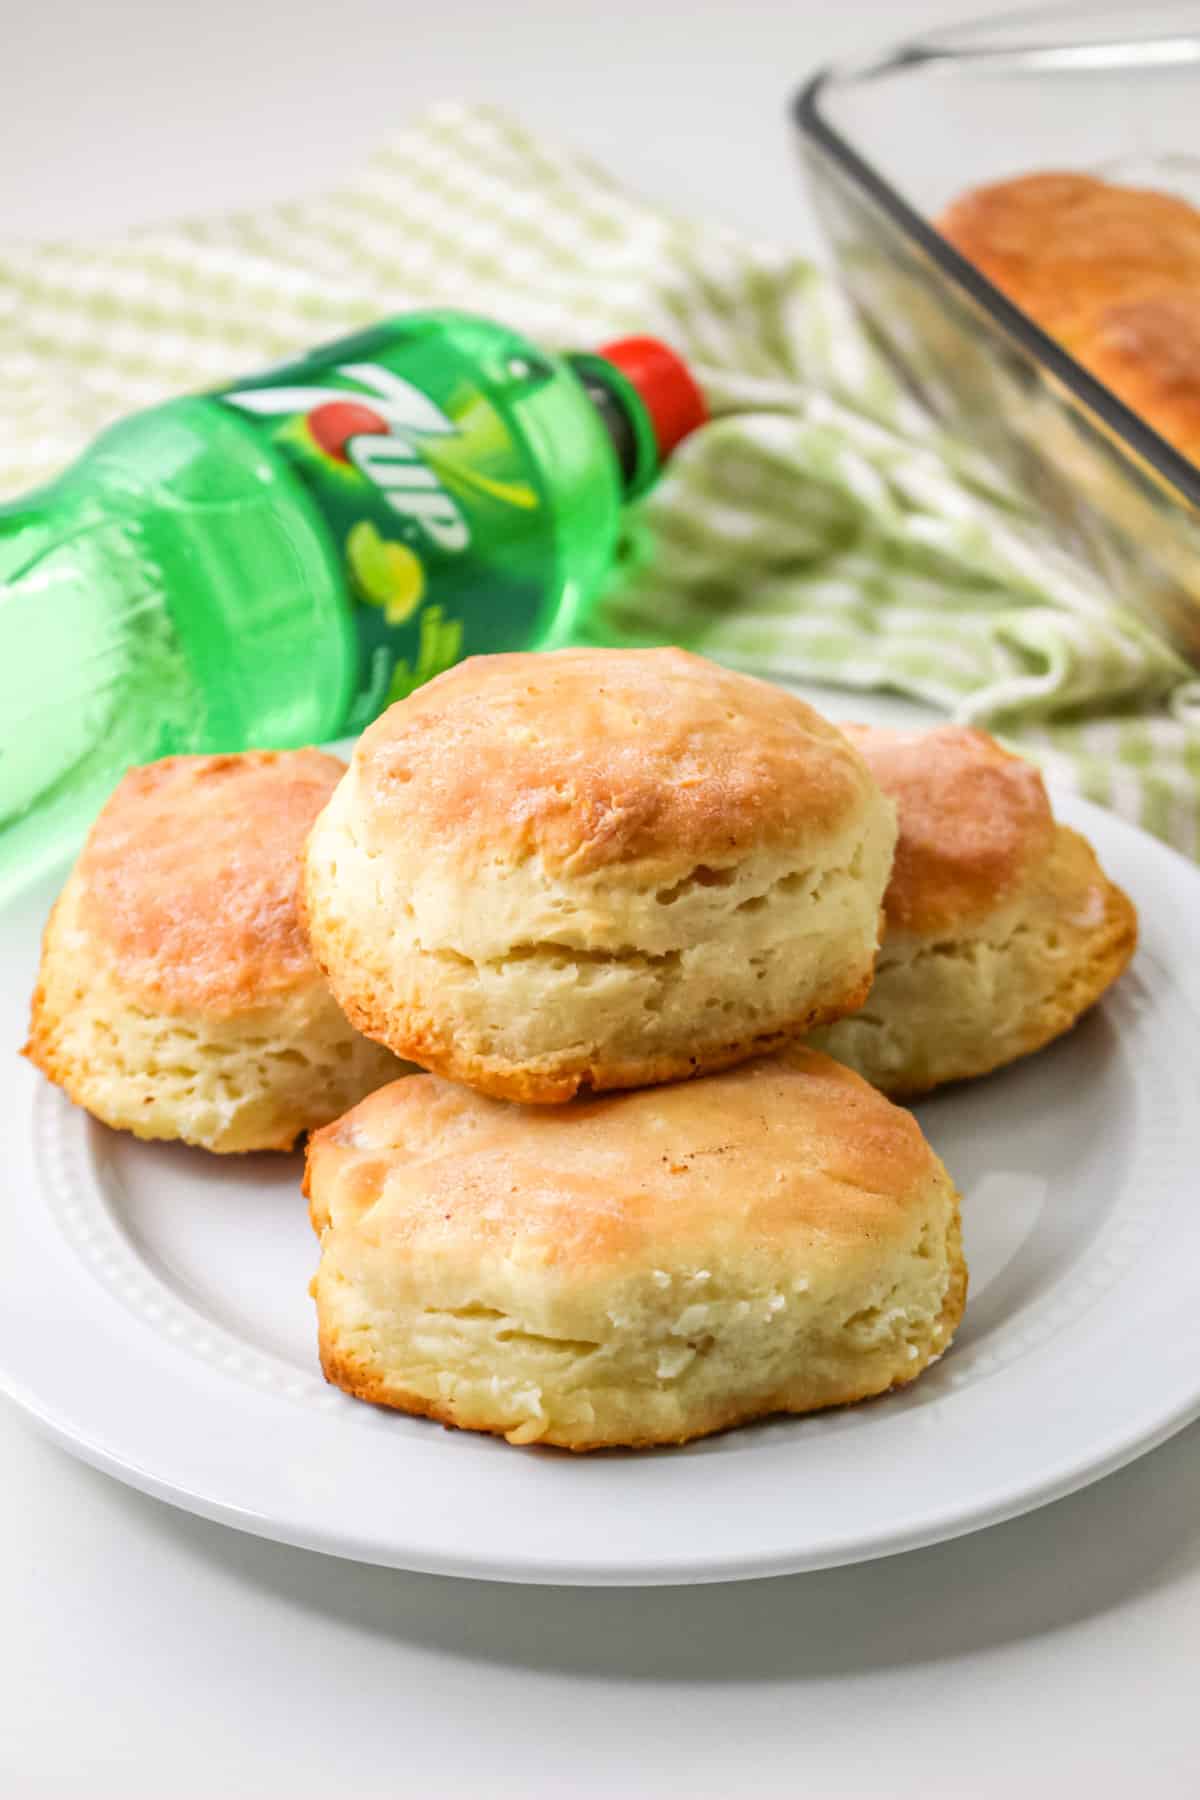 4 soft and fluffy 7 up biscuits on a plate with a bottle of 7 up soda in the background.